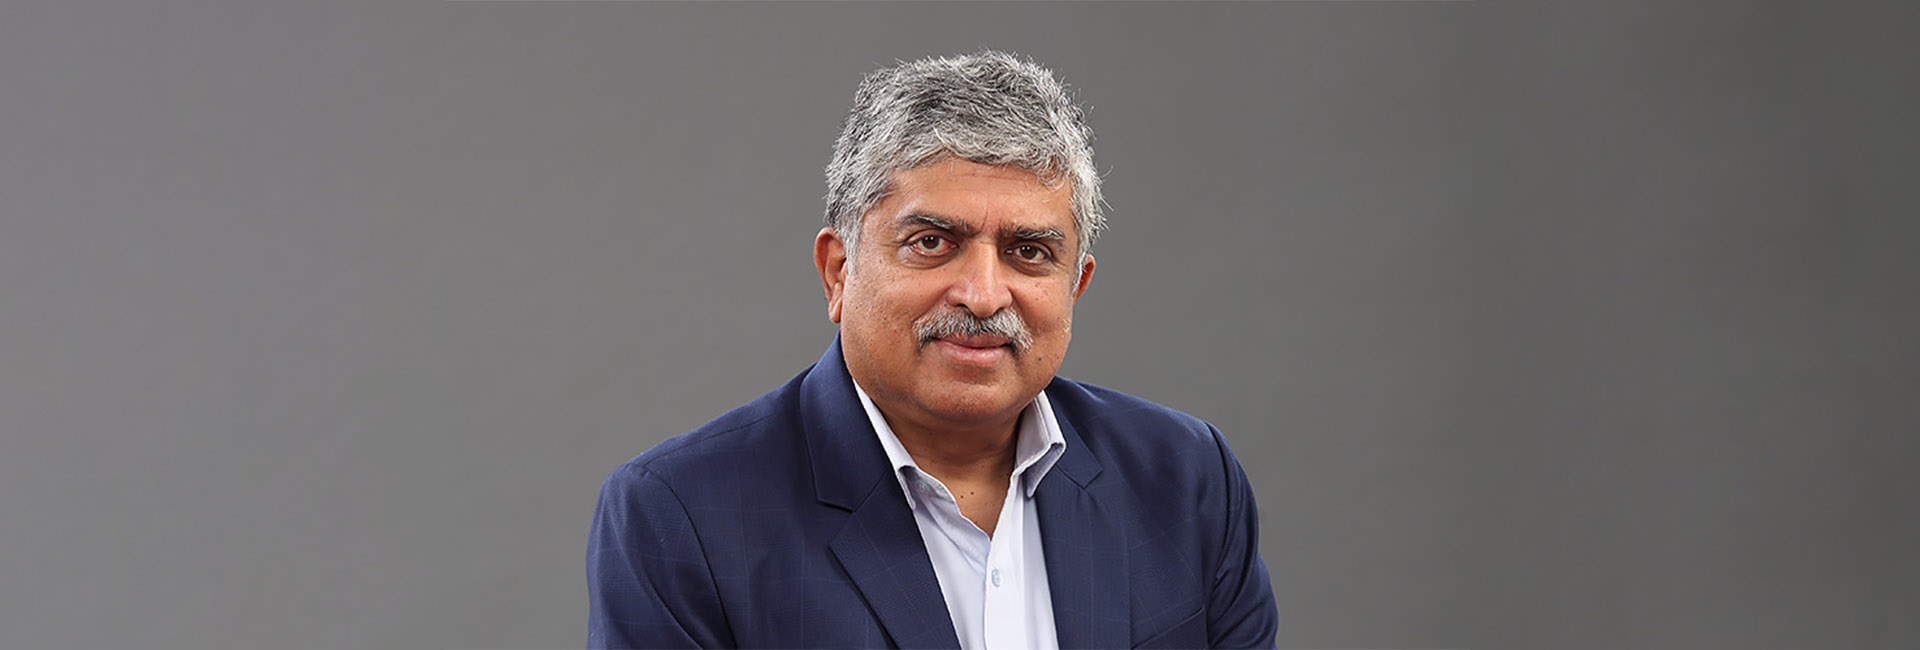 Listen to Nandan Nilekani, co-founder of Infosys, as the Indian multinational IT company commemorates four decades of excellence.